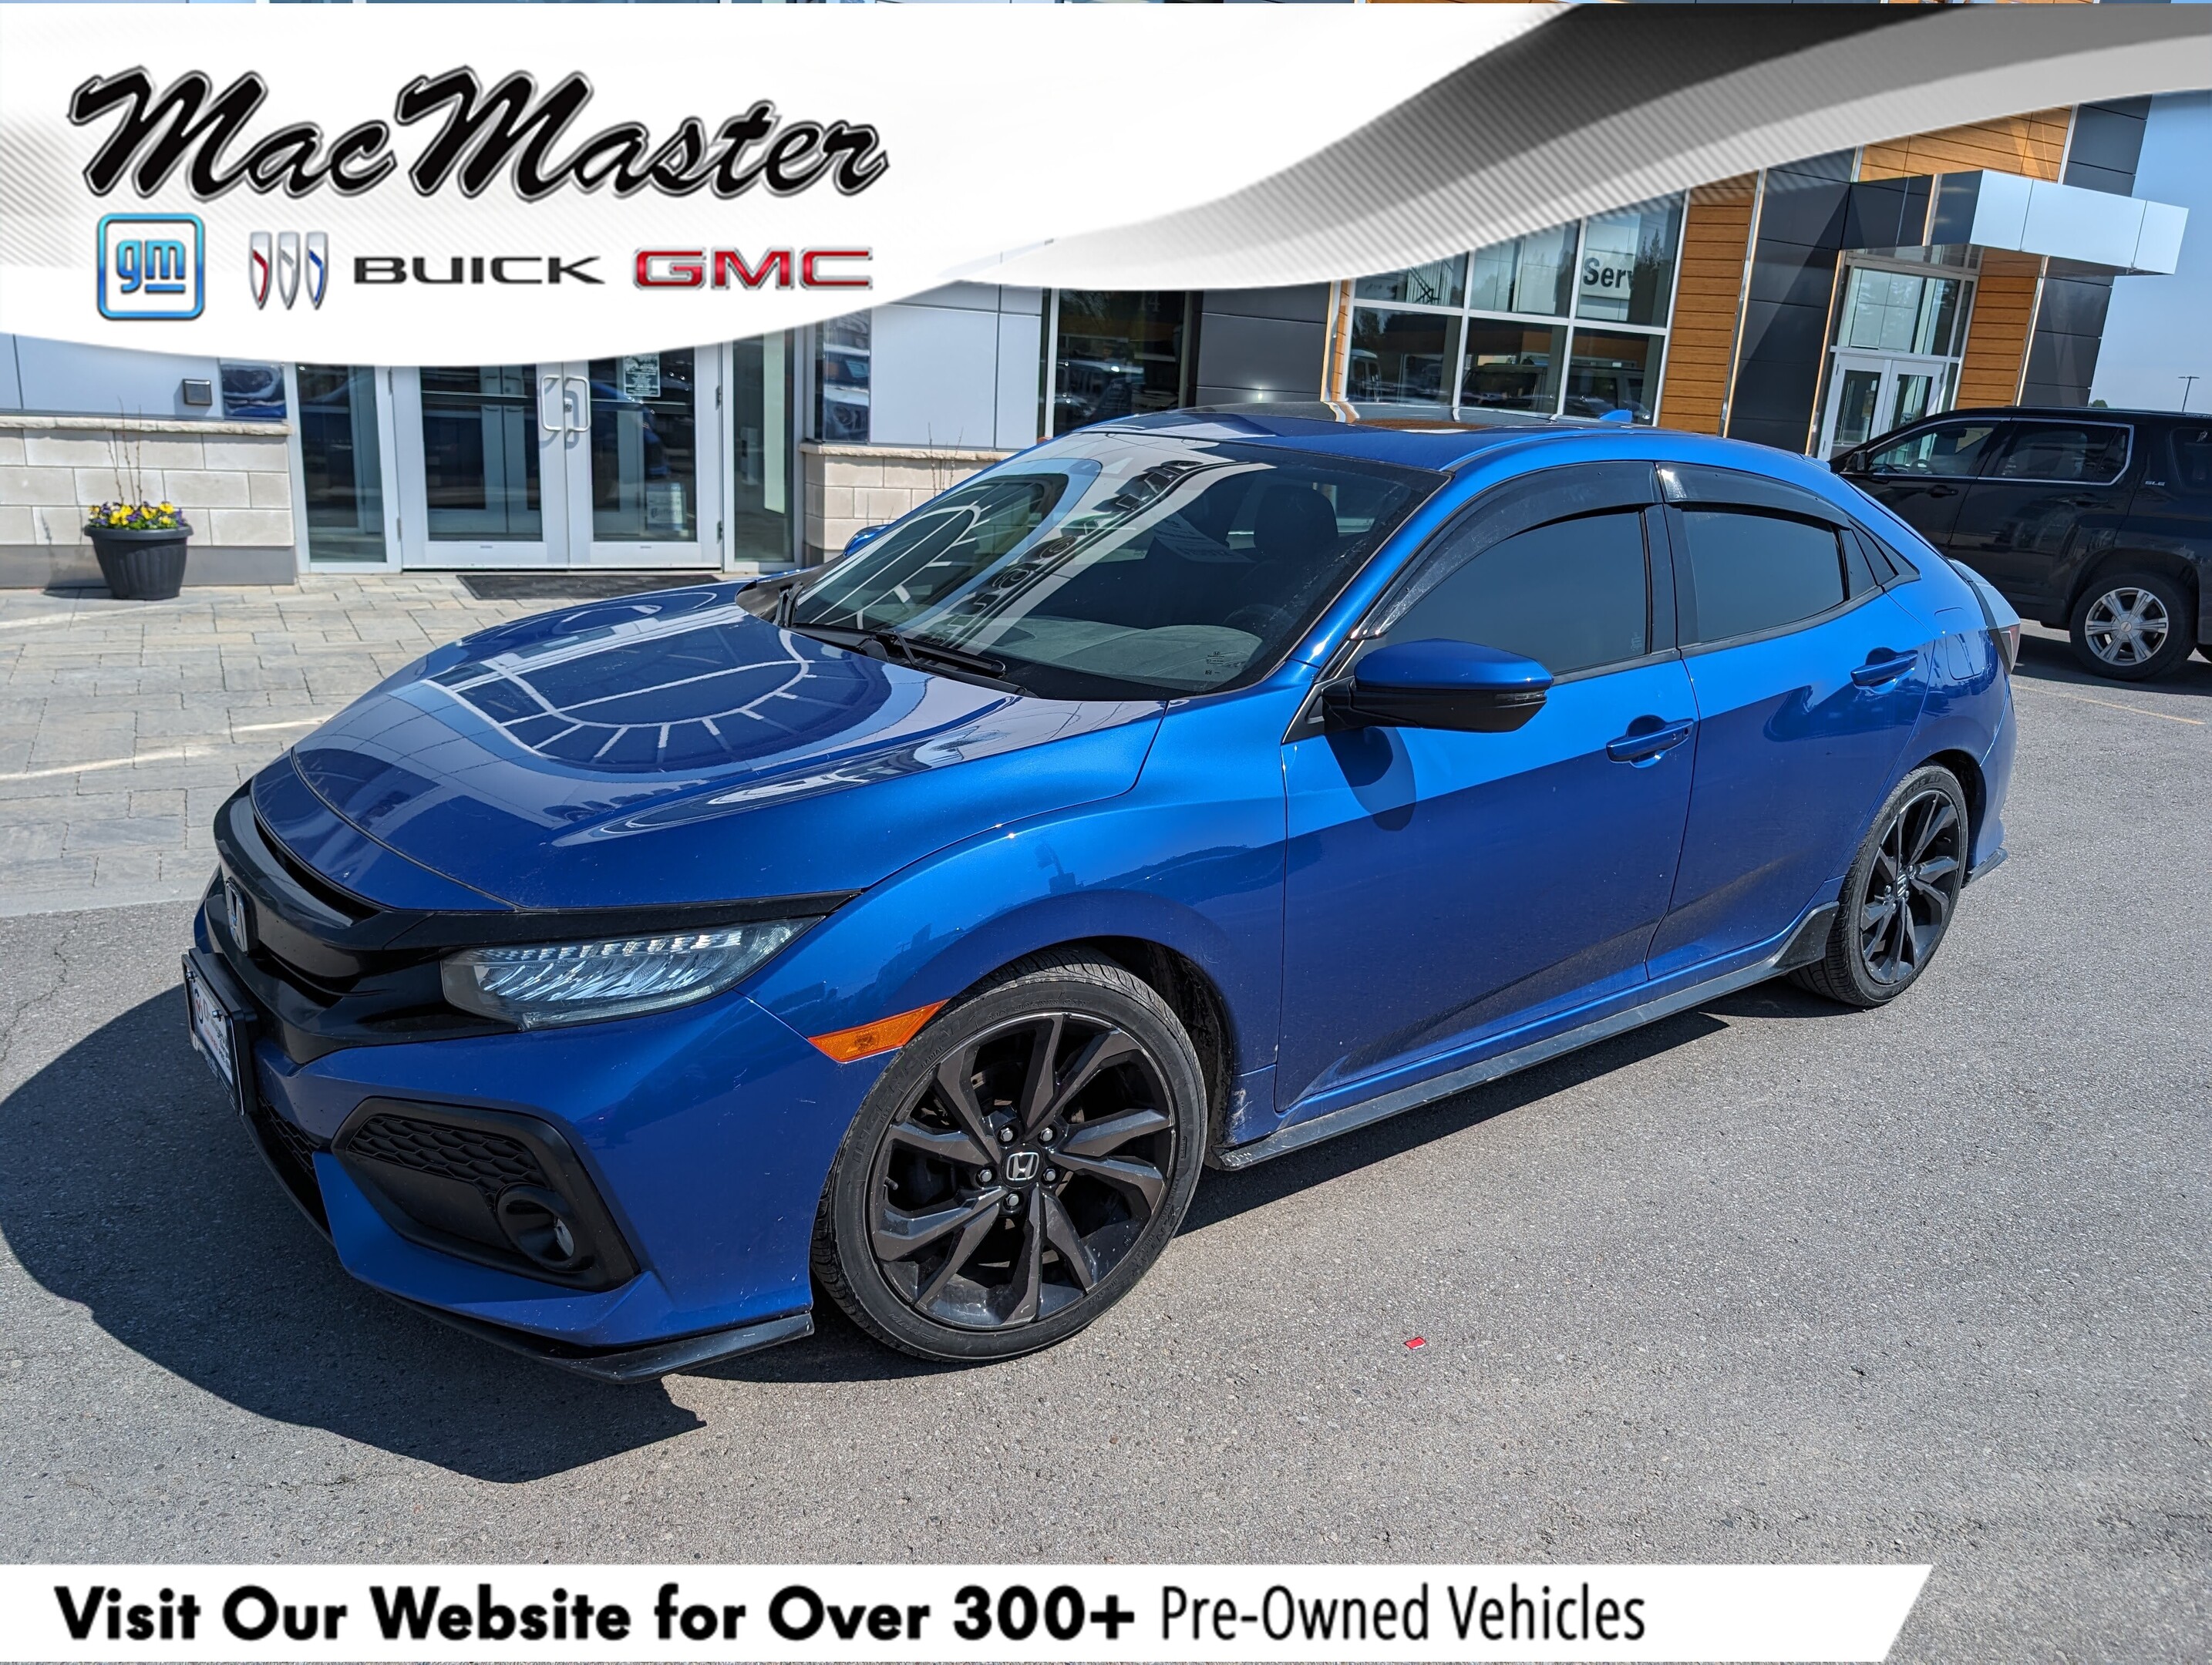 2018 Honda Civic Hatchback SPORT TOURING, MANUAL, HTD LEATHER, ROOF, CLEAN!